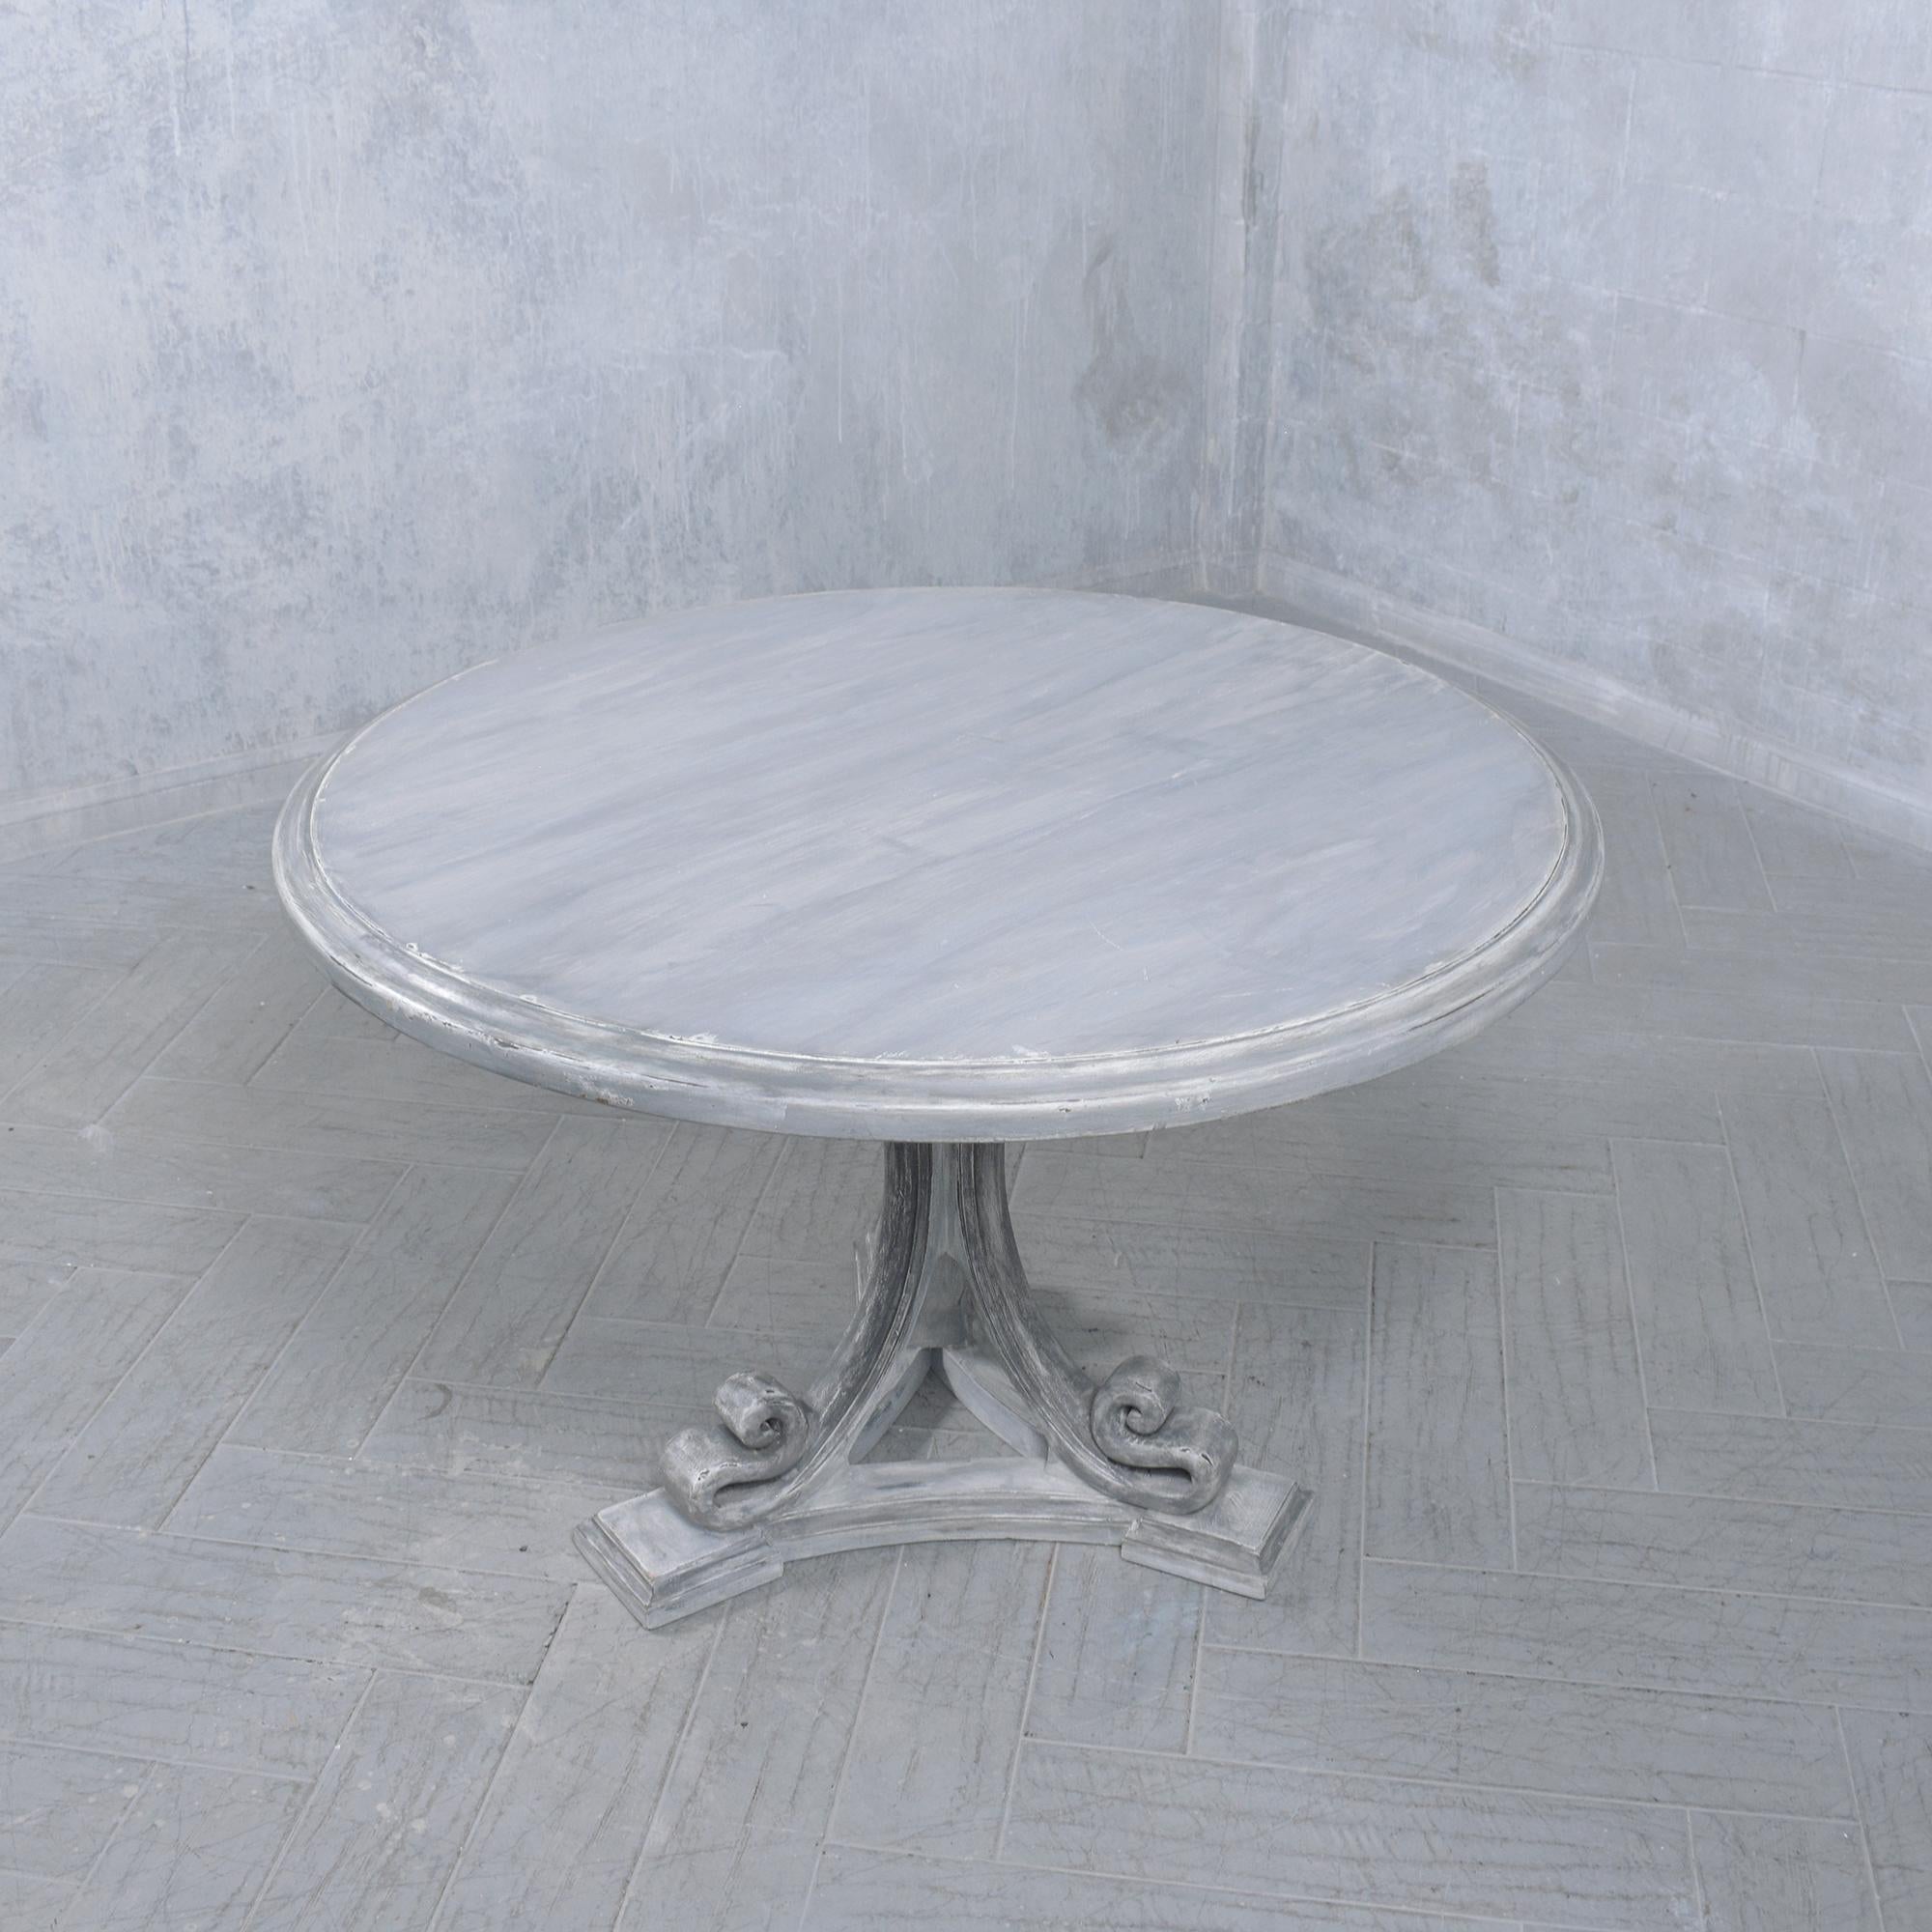 Carved Vintage American Regency Walnut Round Dining Table with Distressed Grey Finish For Sale